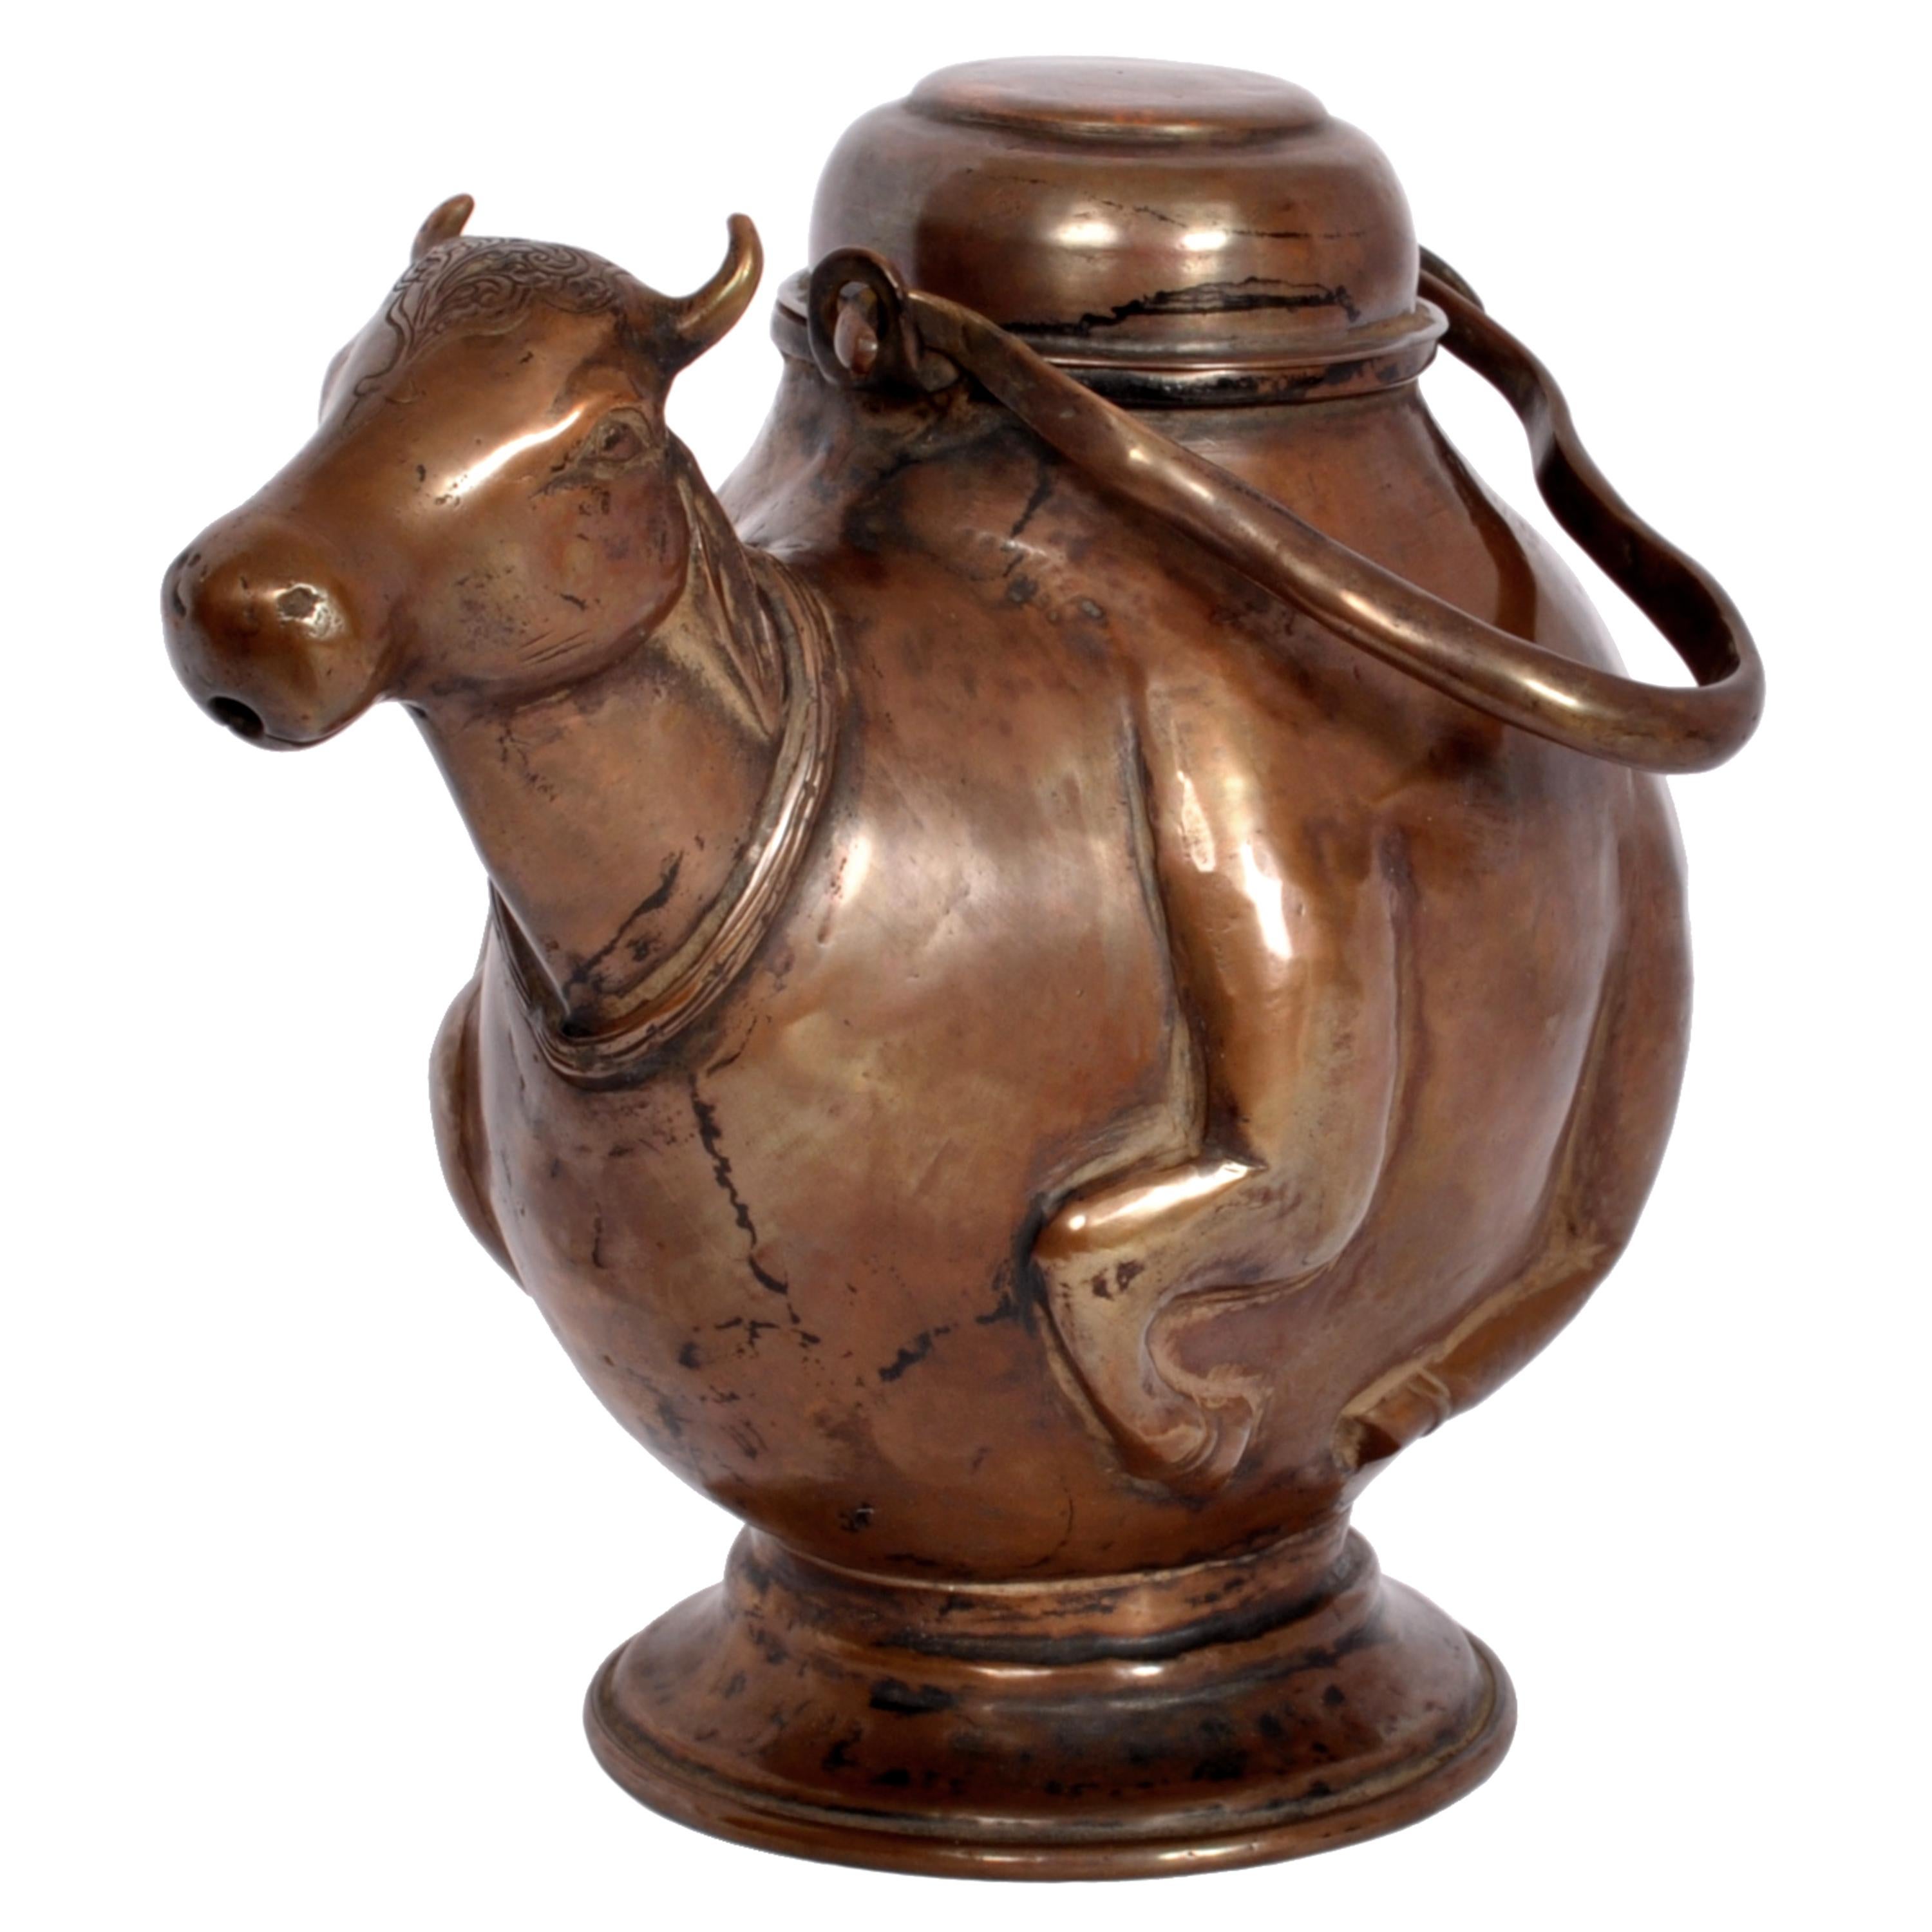 An antique Indian Hindu copper Nandi (bull) lidded and handled water vessel, circa 1800.
In the Hindu faith & culture of India the bull is a sacred animal, the term Nandi means 